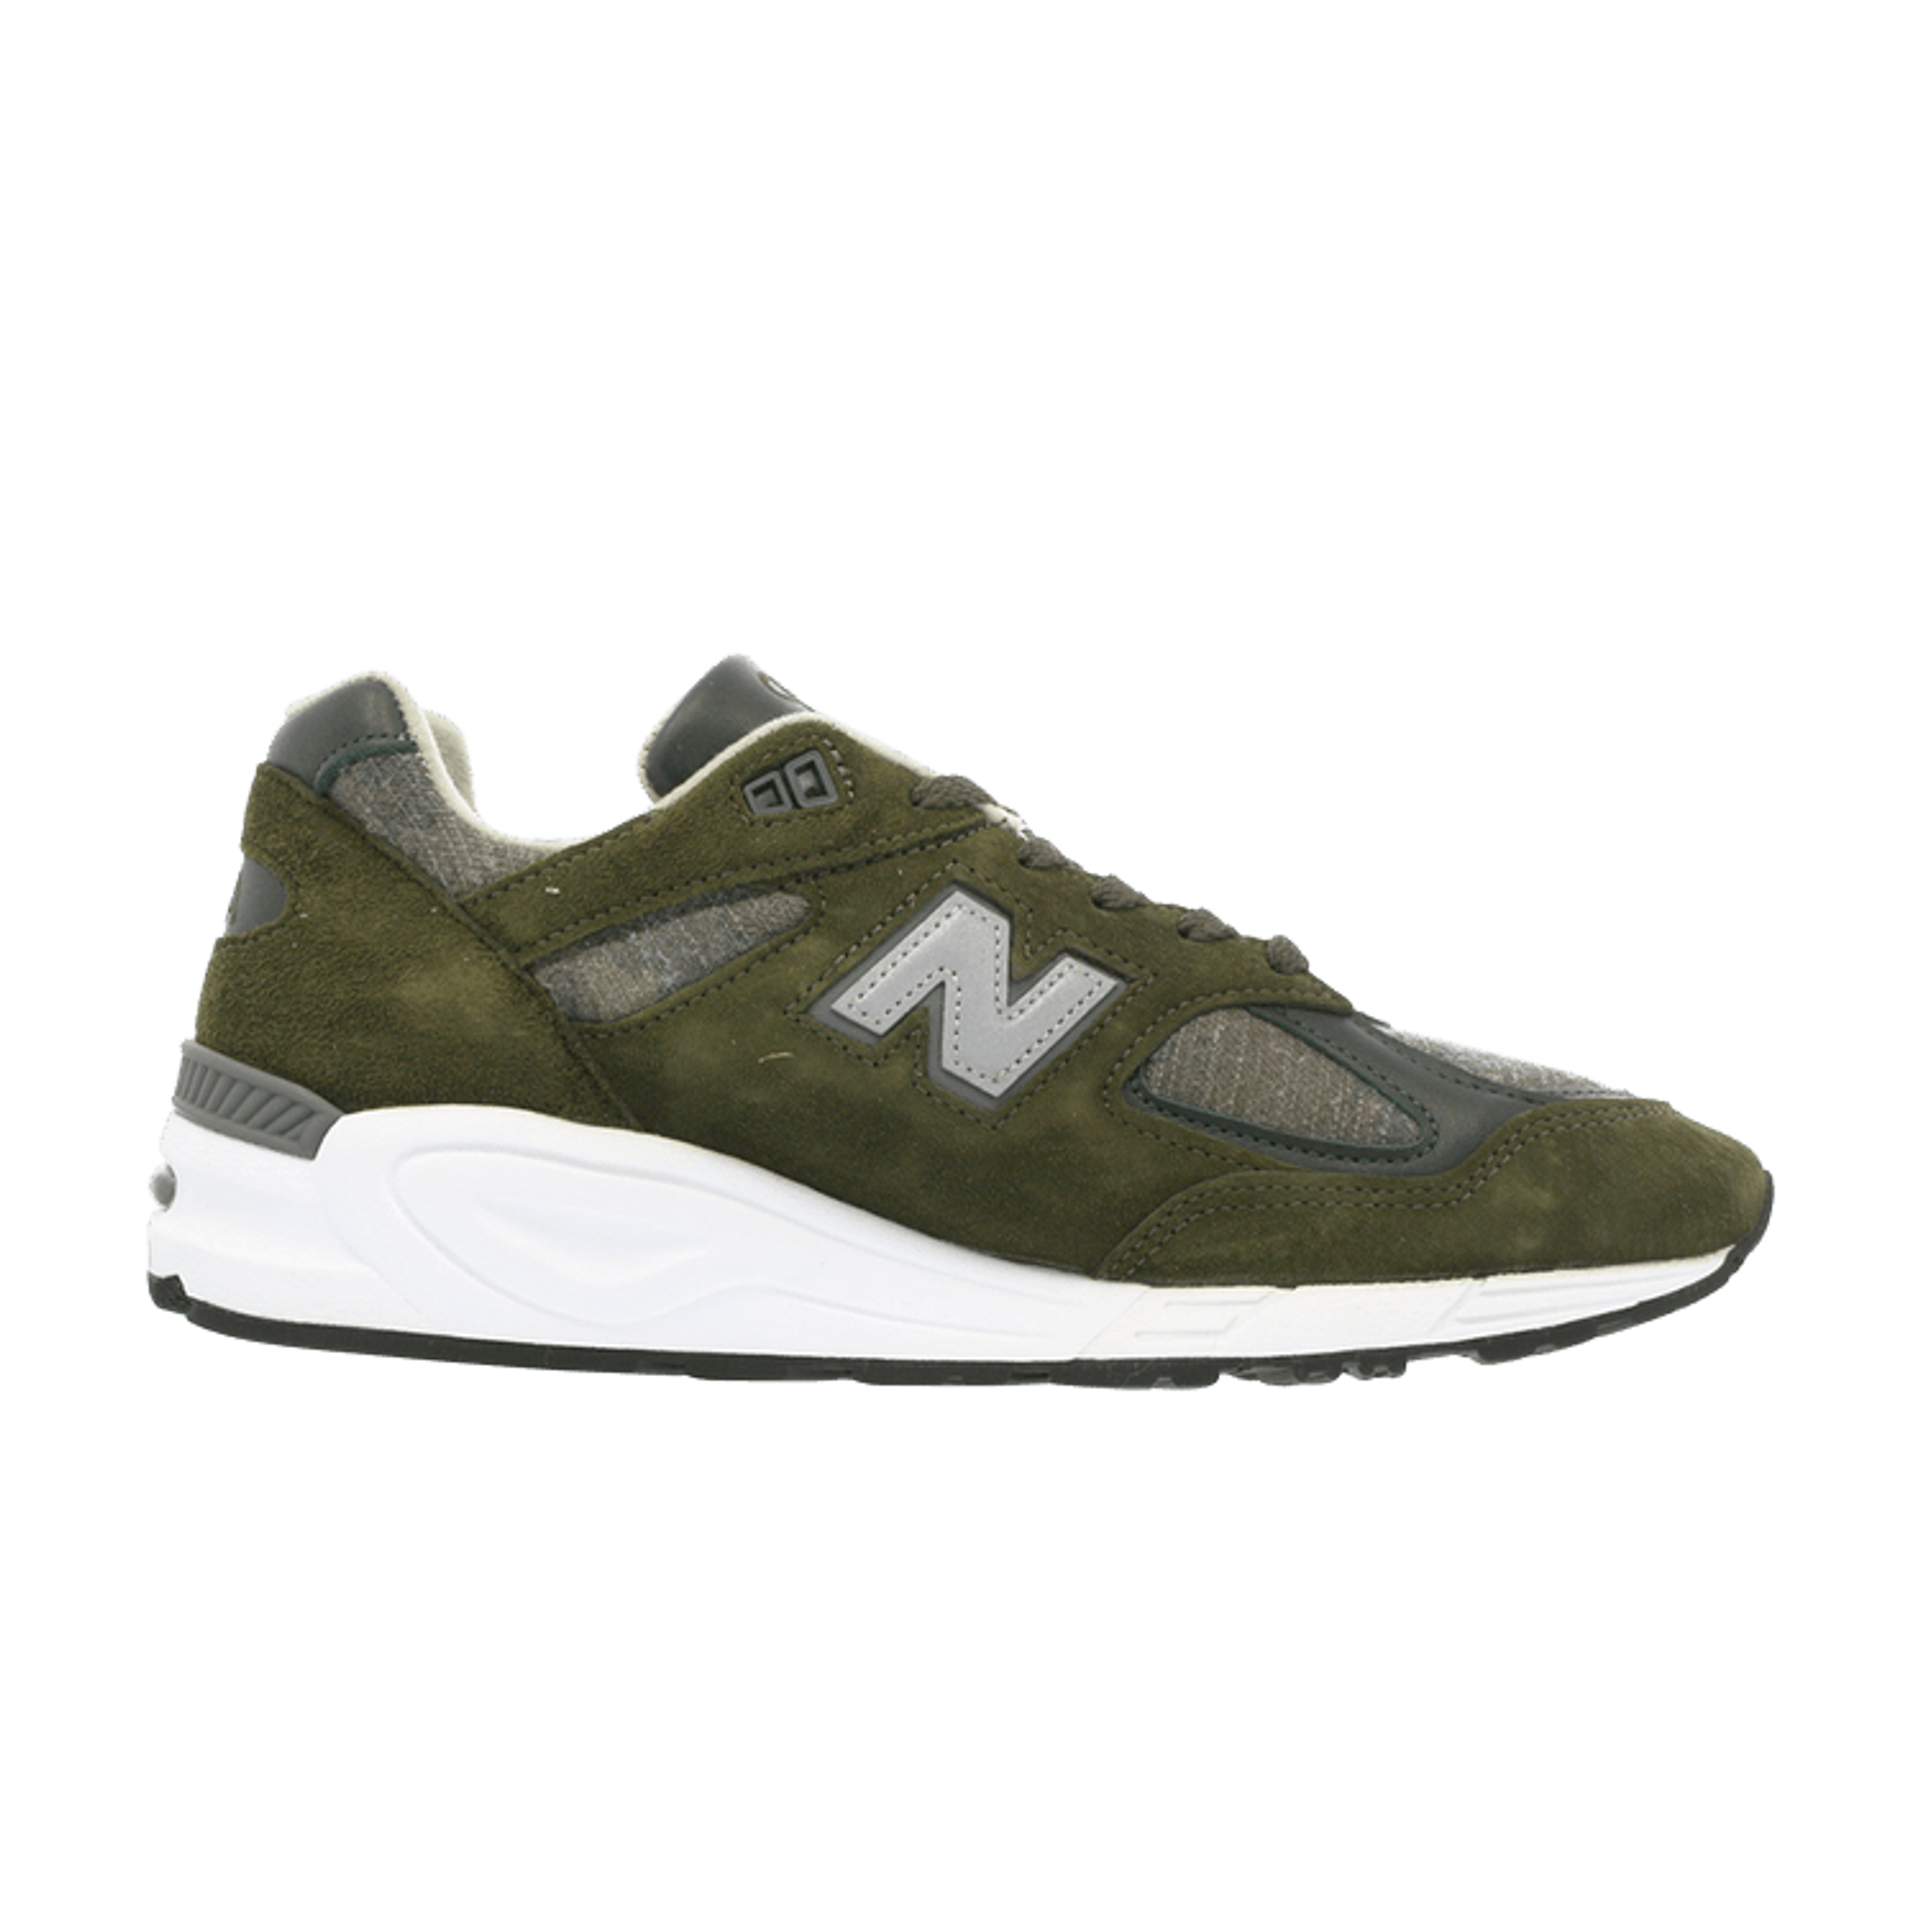 990v2 Made in USA 'Age of Exploration'